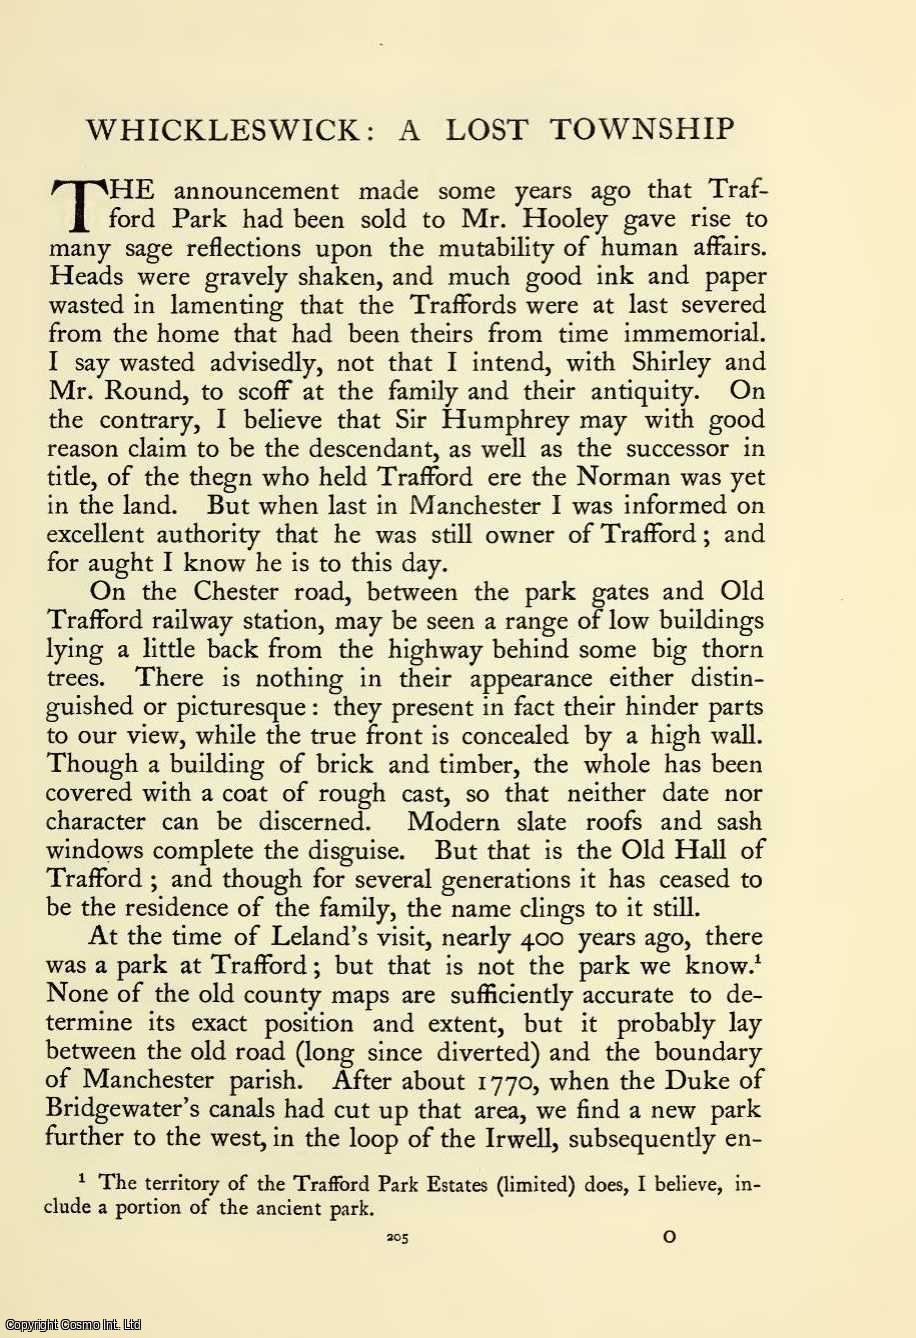 W. H. B. Bird - Whickleswick : A Lost Township. An original article from The Ancestor, a Quarterly Review of County & Family History, Heraldry and Antiquities, 1903.